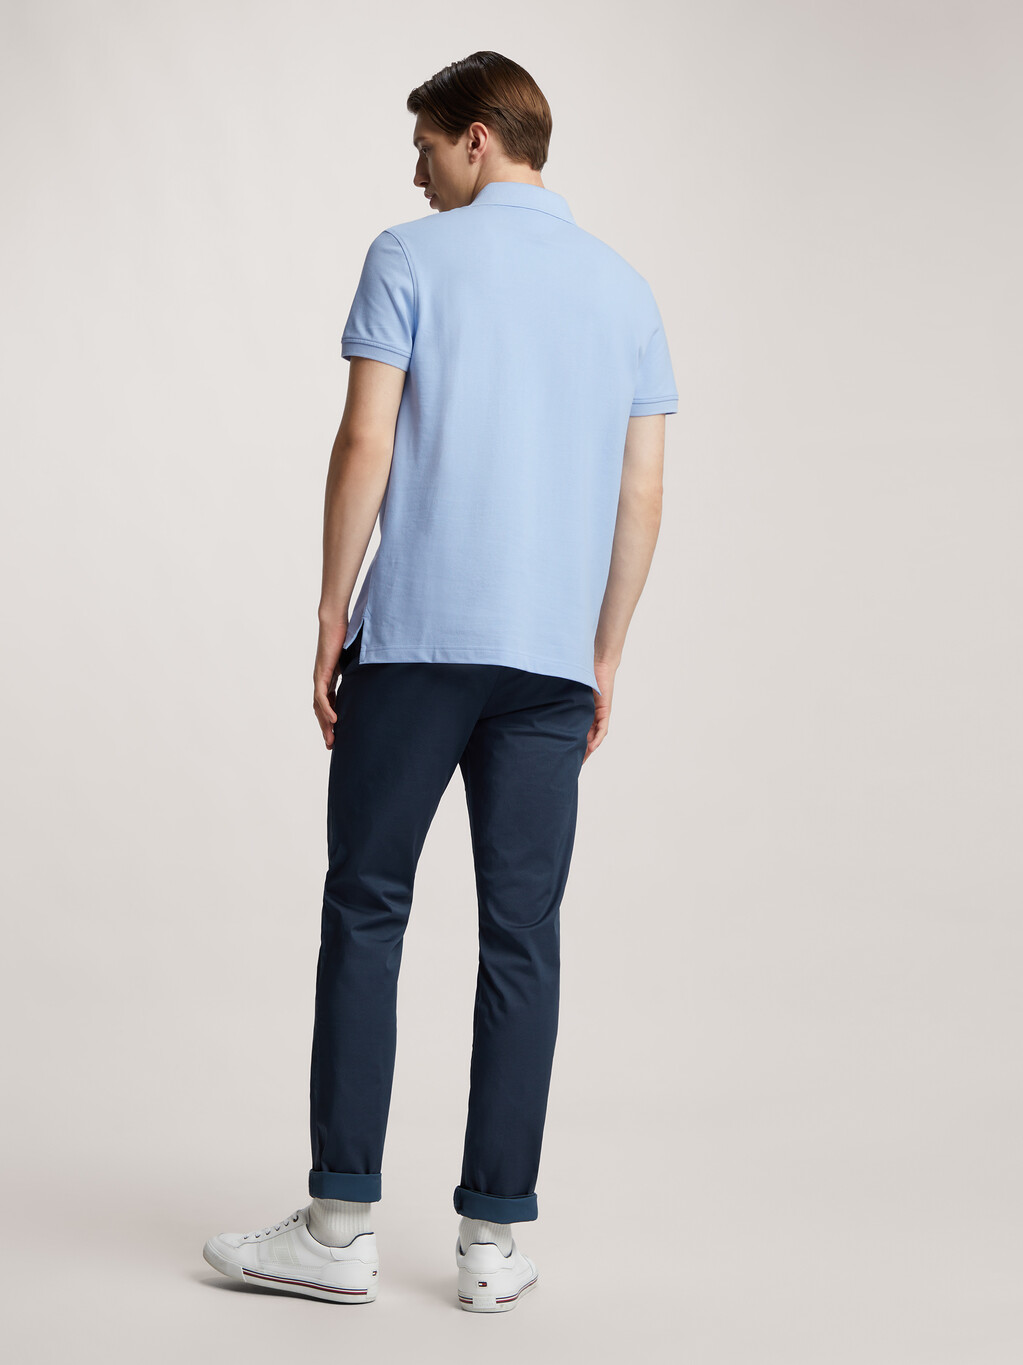 1985 Collection Slim Fit Polo, Chambray Blue, hi-res